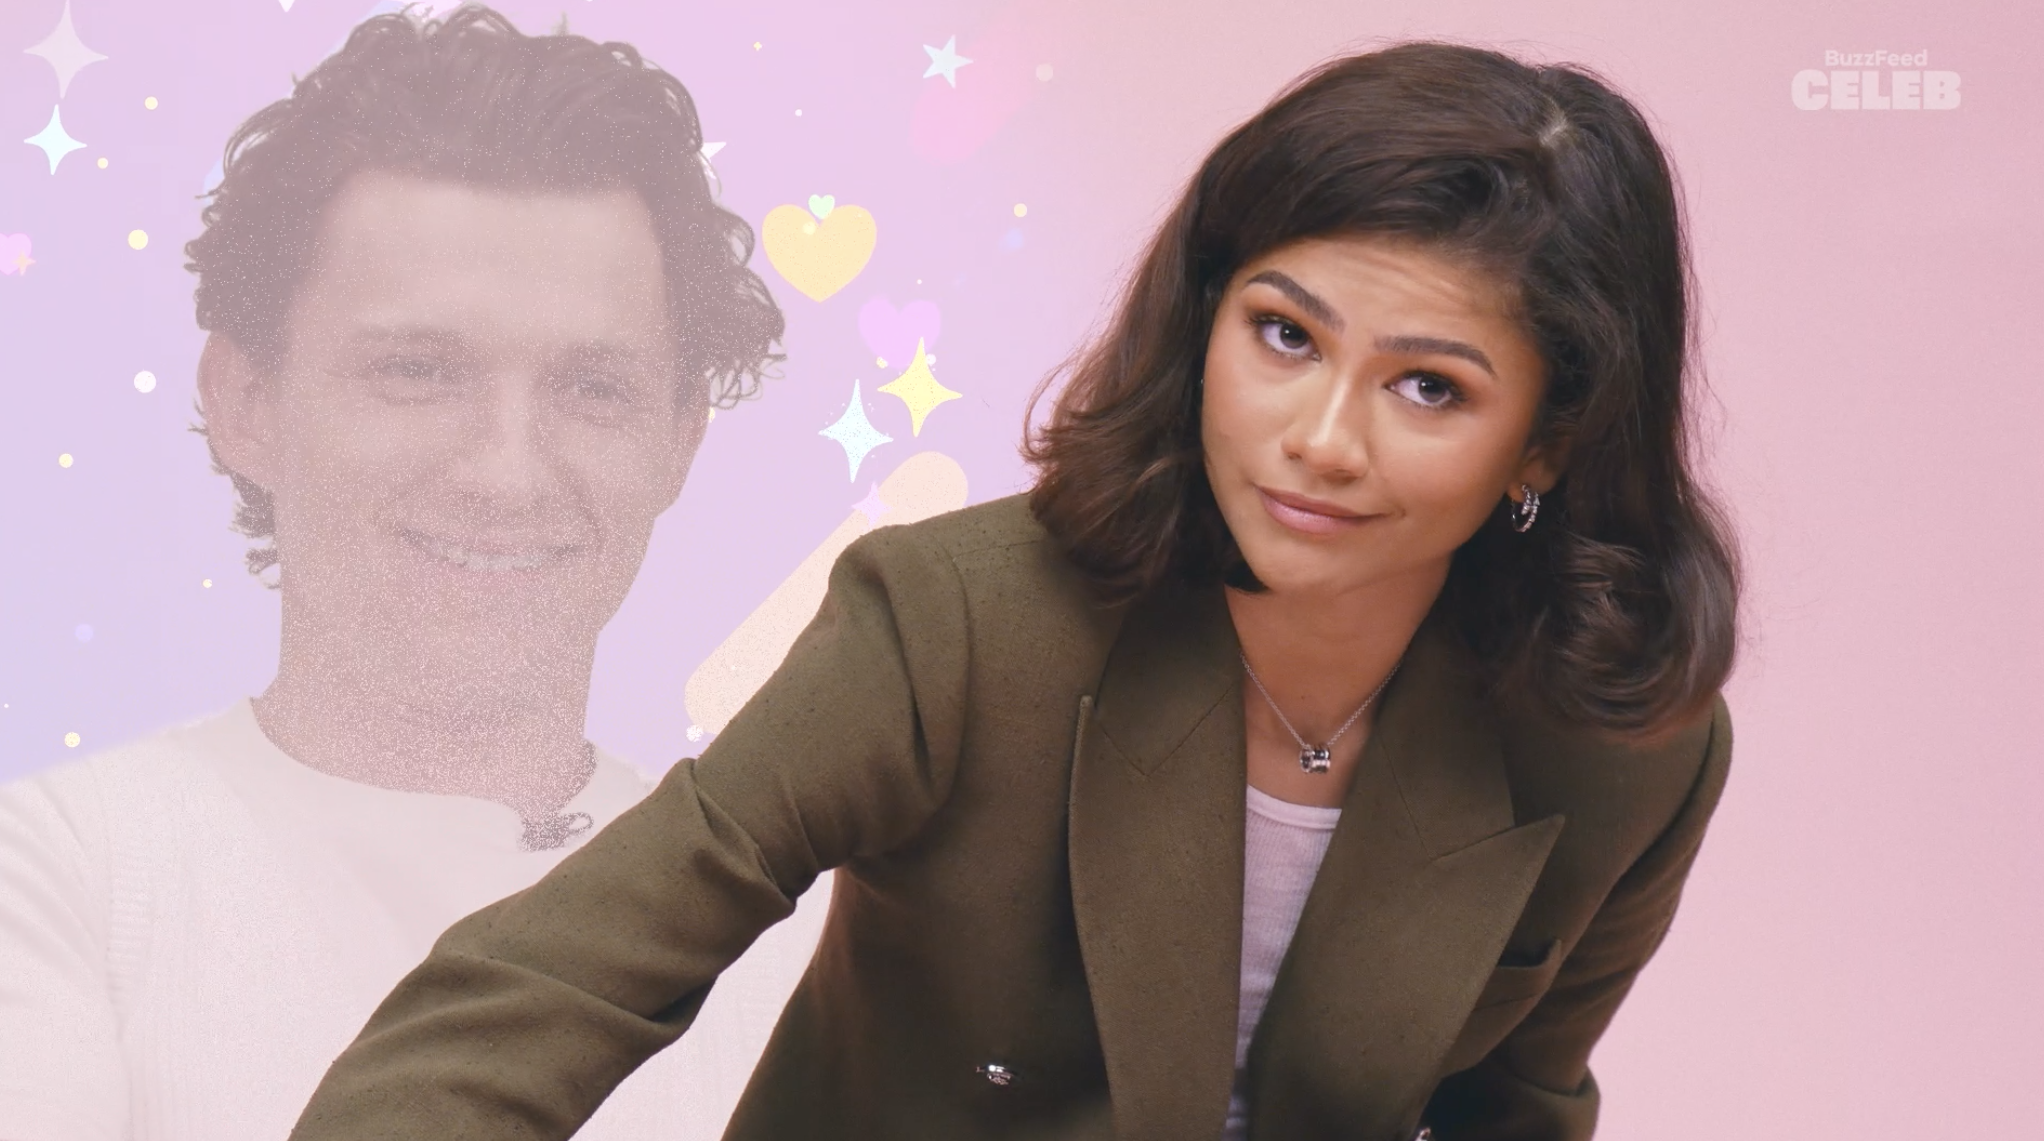 Zendaya in a blazer, smiling suggestively, with a graphic of Tom behind her as if in her thoughts